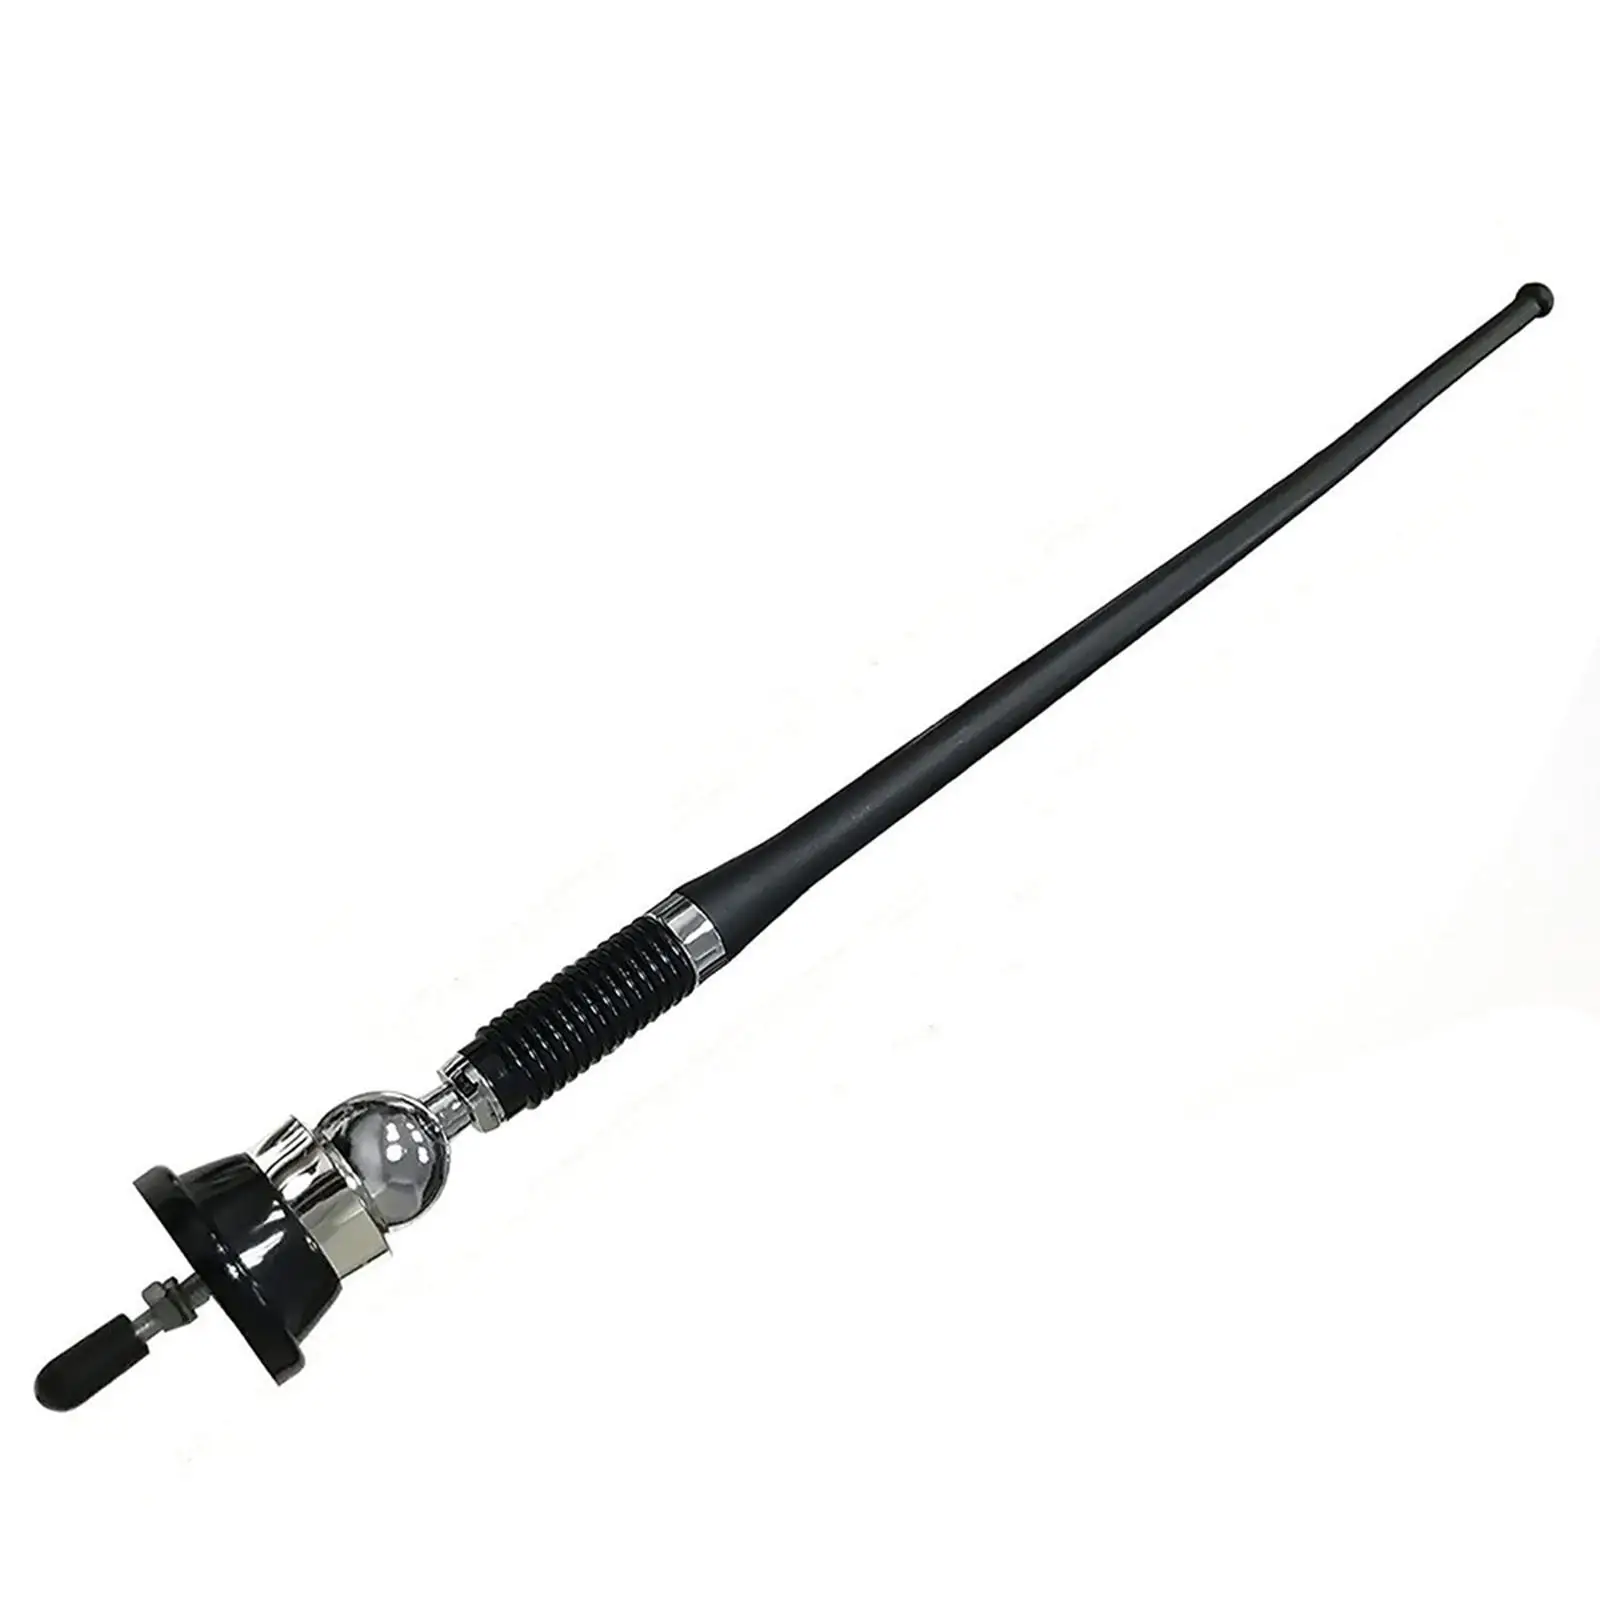 Universal Car Radio Antenna AM FM Accessory Strong Signal Stereo 180 Rotation Angle Adjustable Roof Mast for SUV Motorcycle